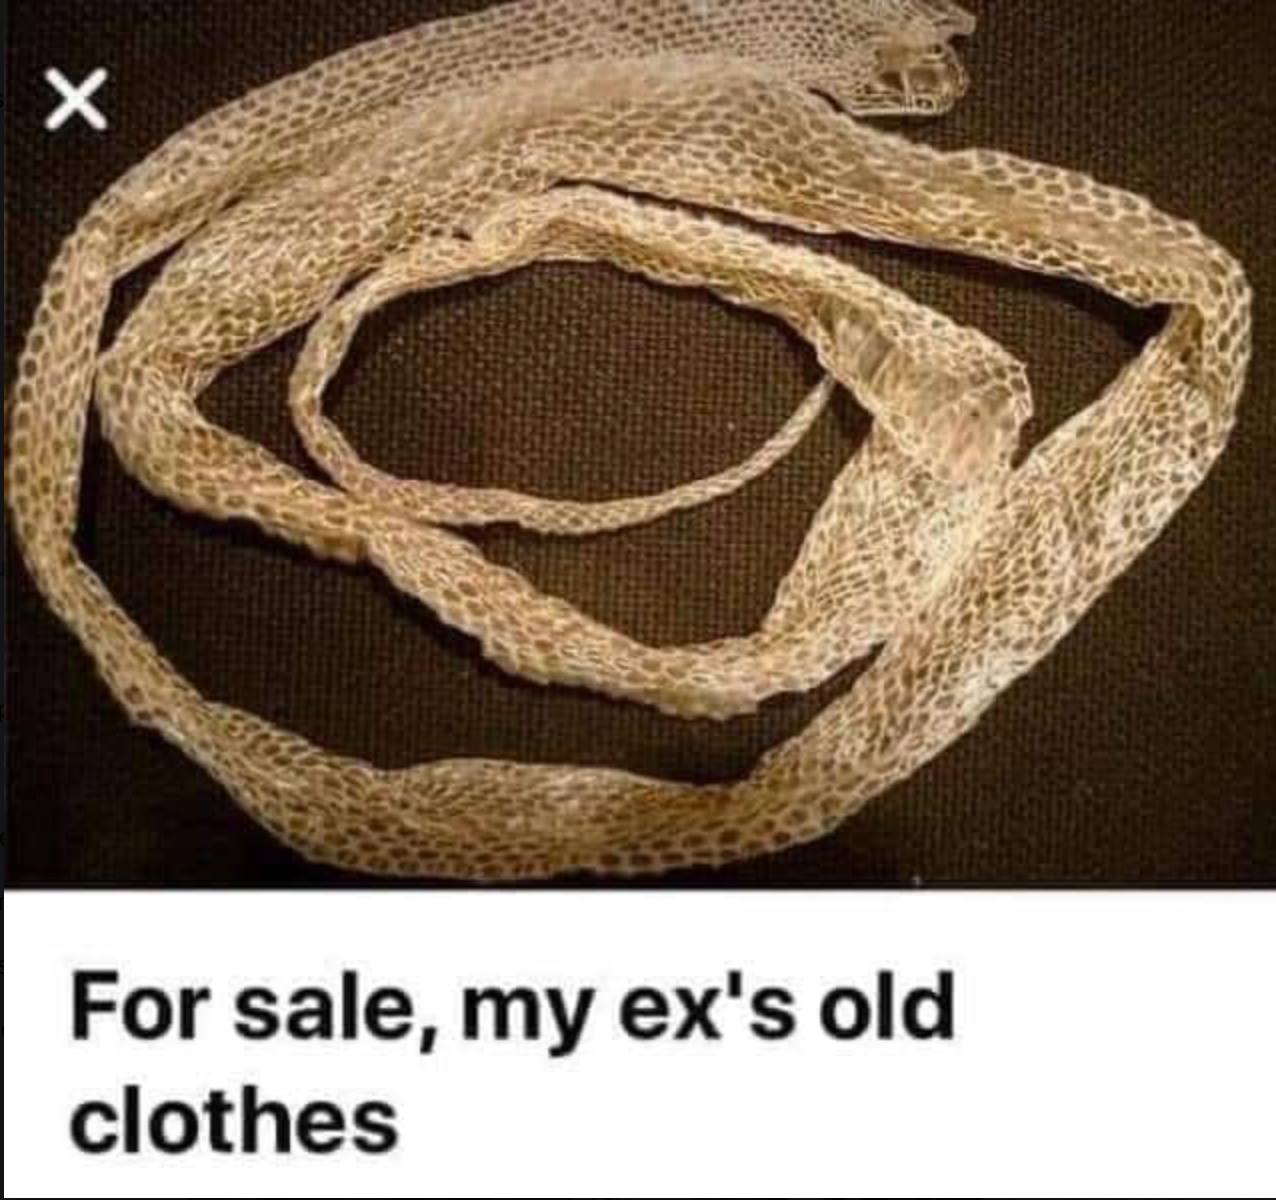 snake skins - X For sale, my ex's old clothes